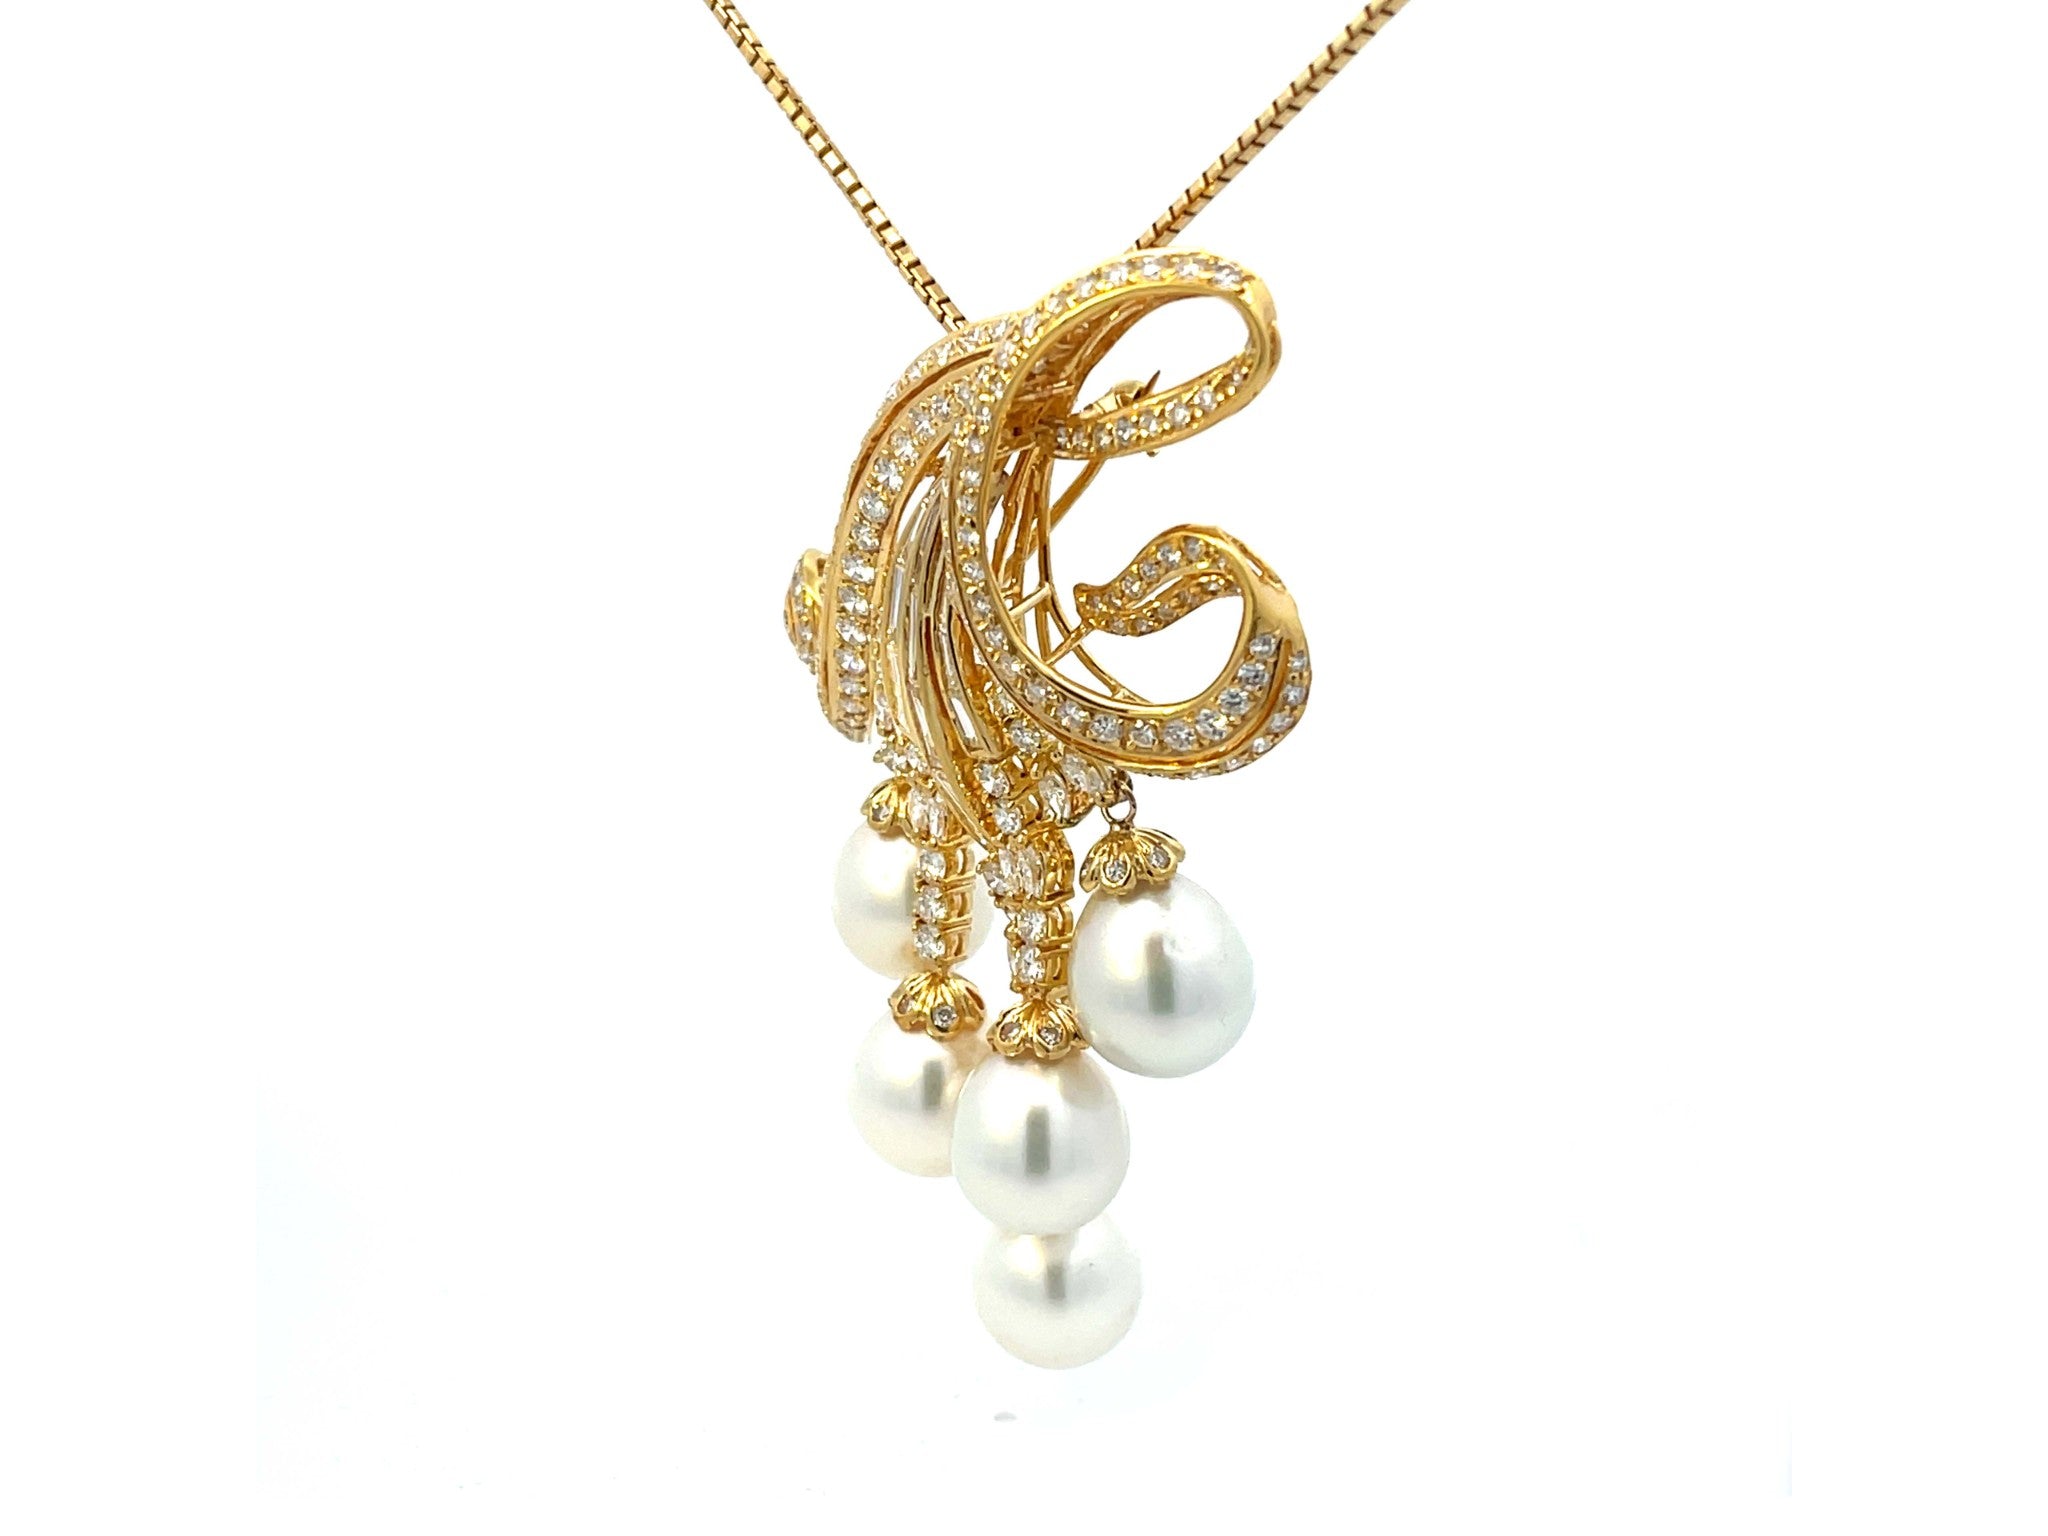 Large Diamond and Pearl Necklace in 18k Yellow Gold